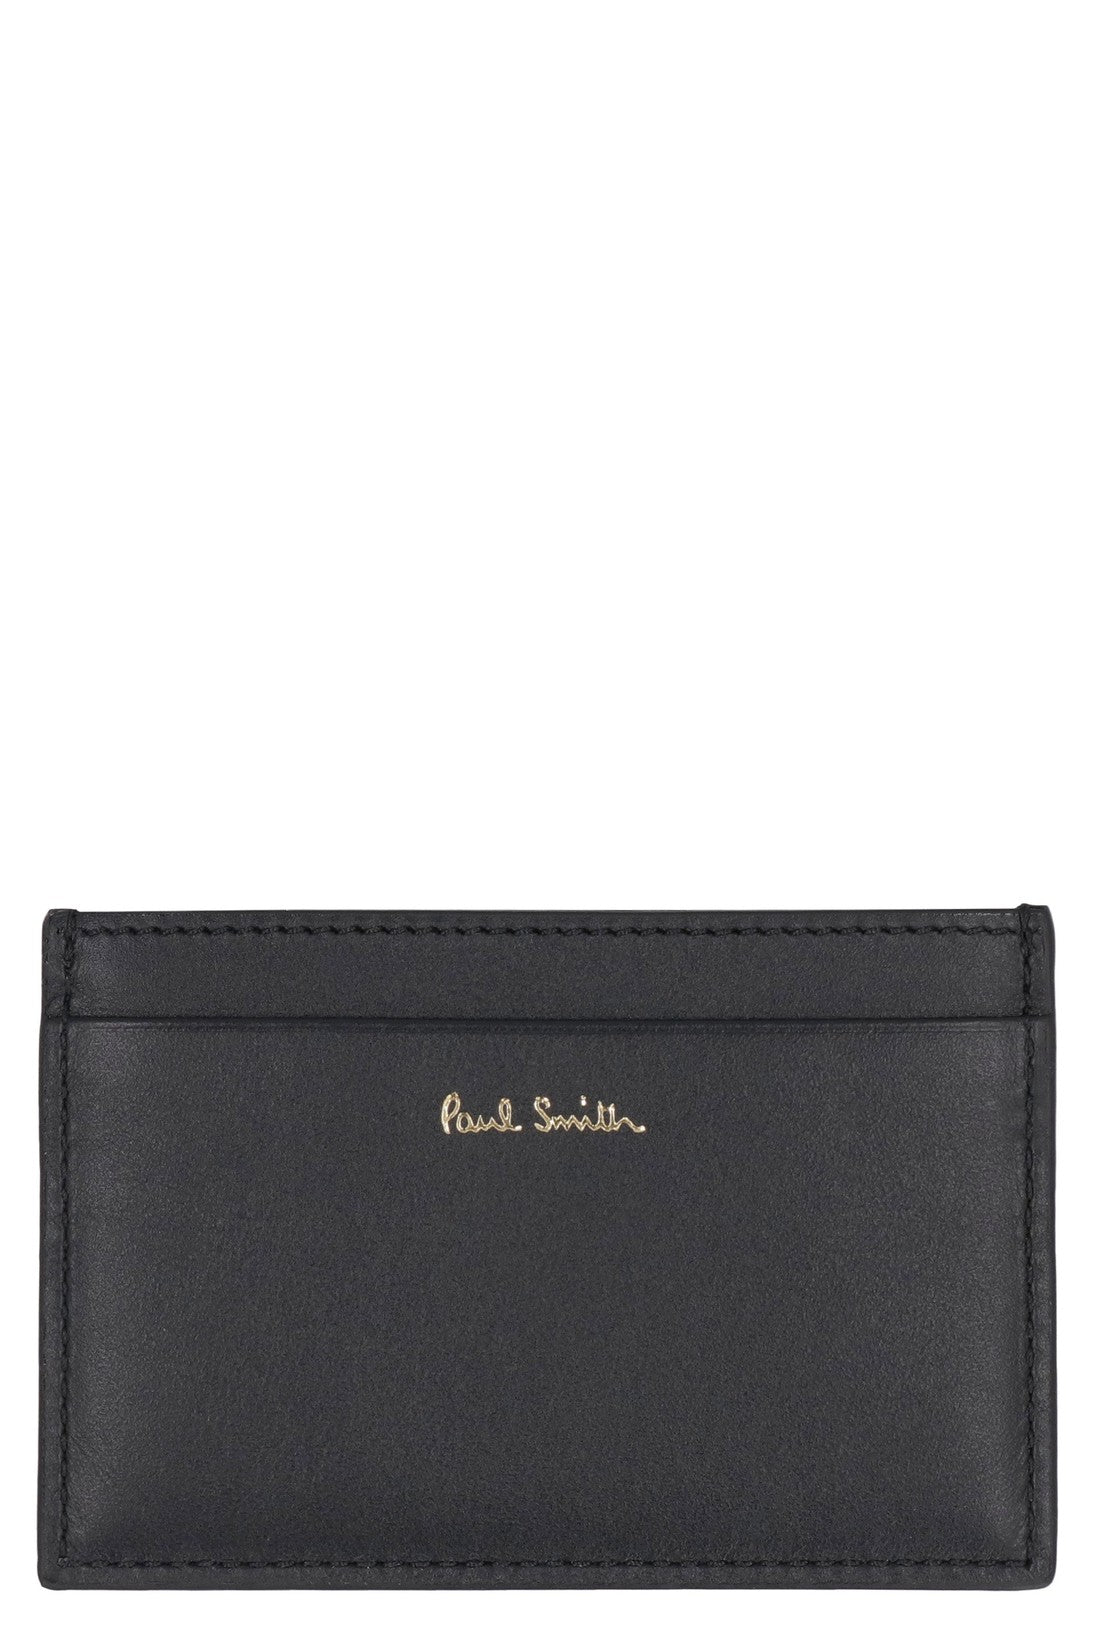 Paul Smith-OUTLET-SALE-Leather card holder-ARCHIVIST